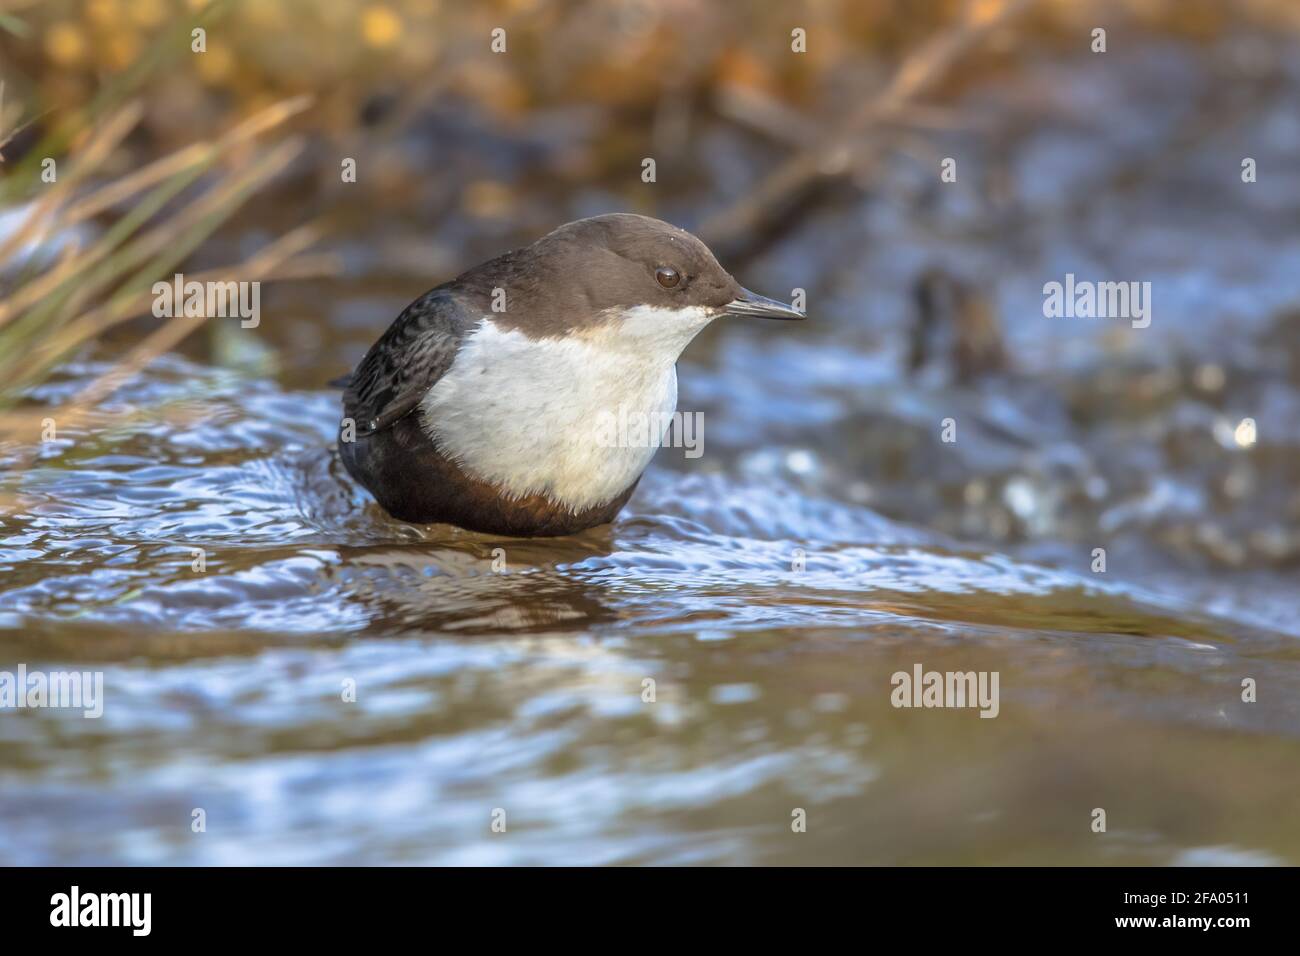 White-throated dipper (cinclus cinclus) aquatic bird foraging in fast flowing water of a creek in natural habitat. The dipper is searching for food be Stock Photo